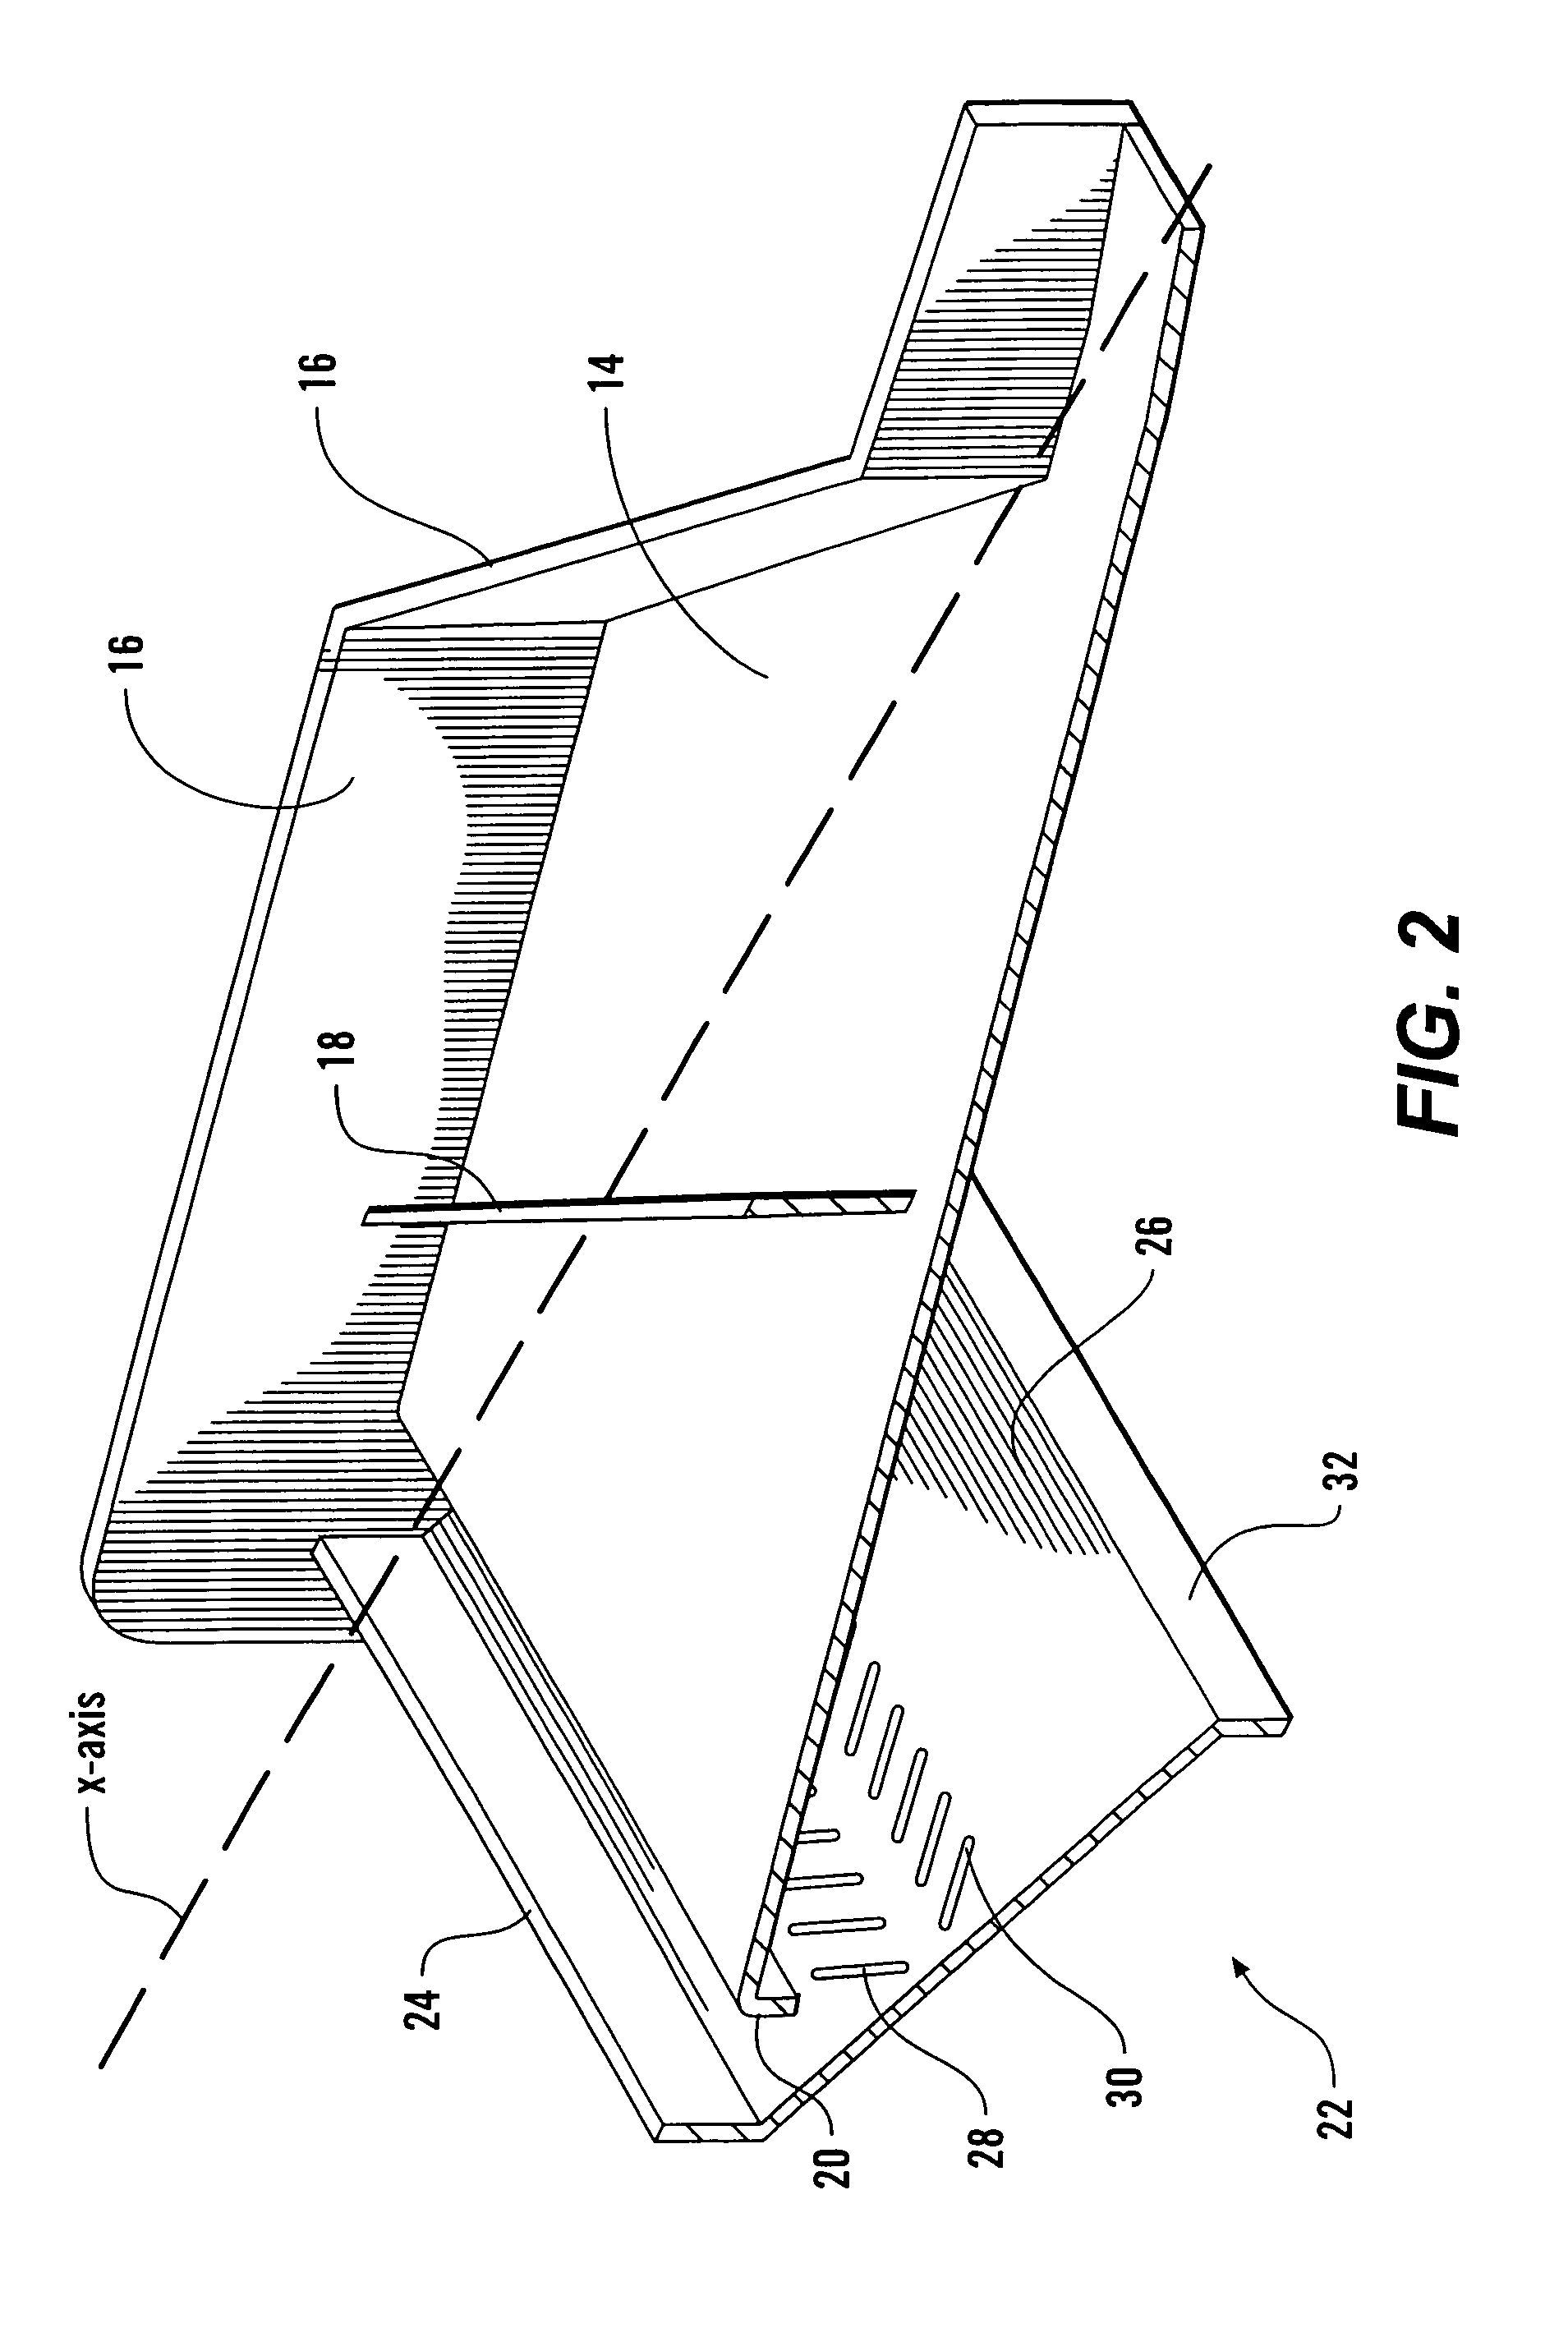 Vibrational excited frame food coating apparatus and methods of use thereof